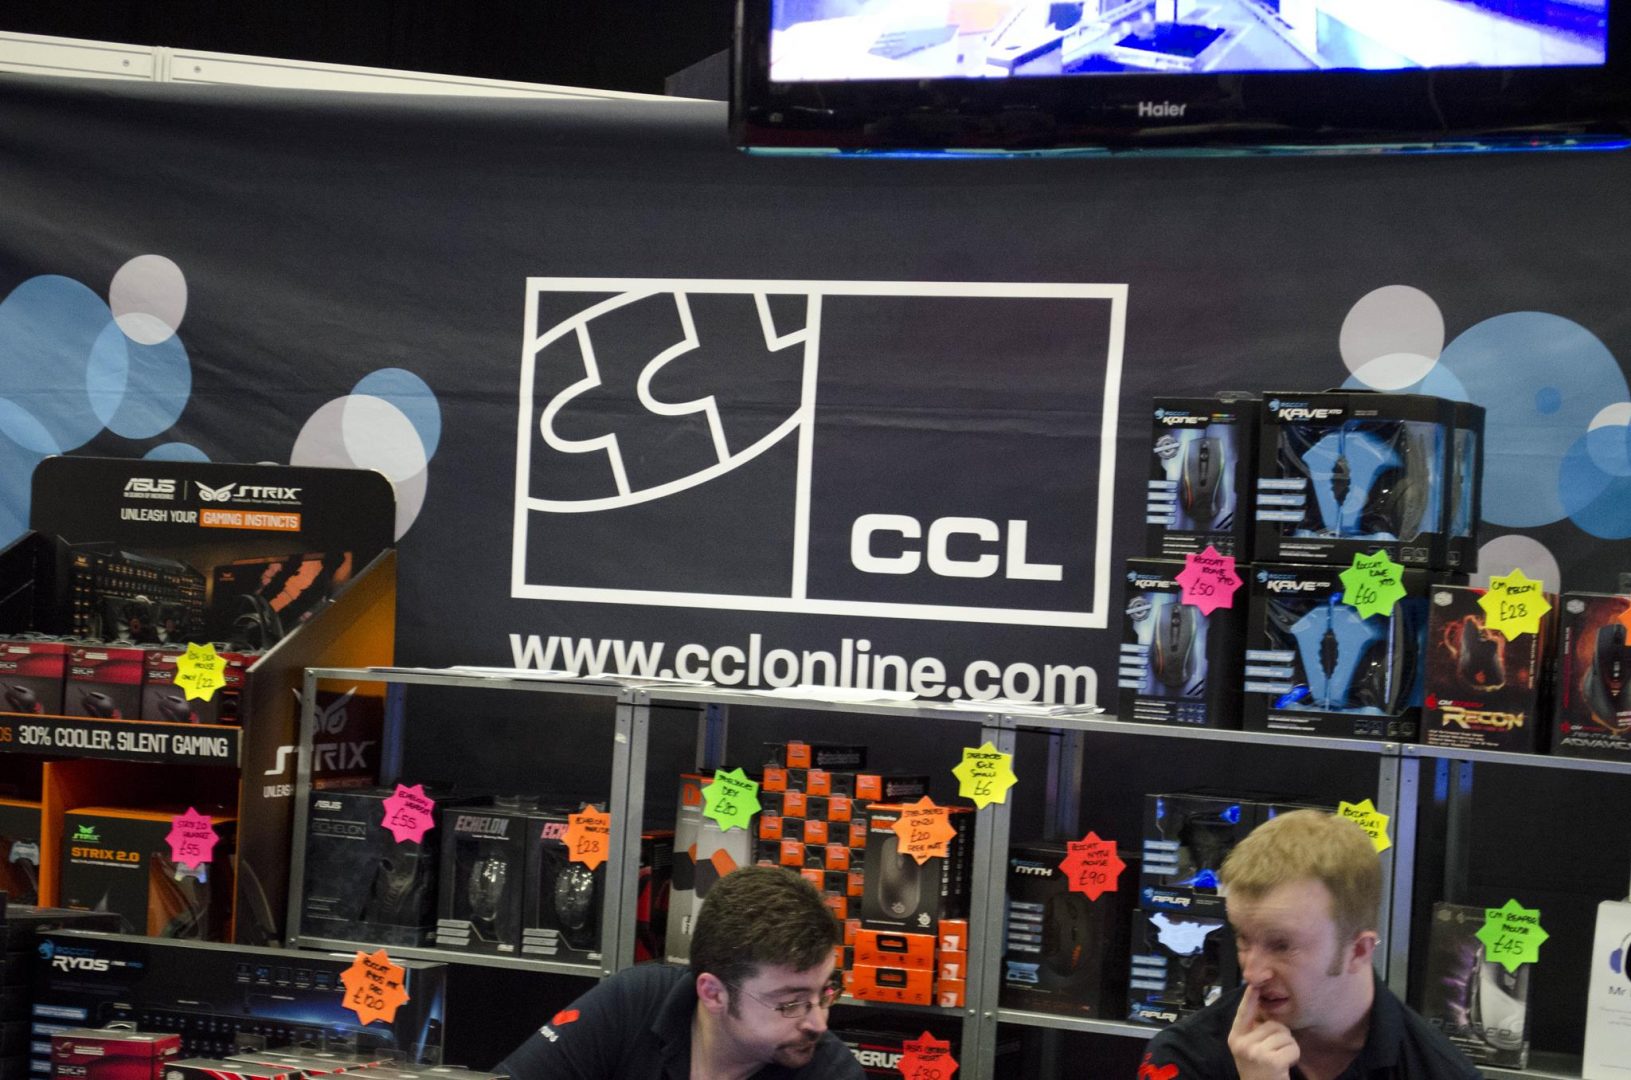 The CCL Booth at I55